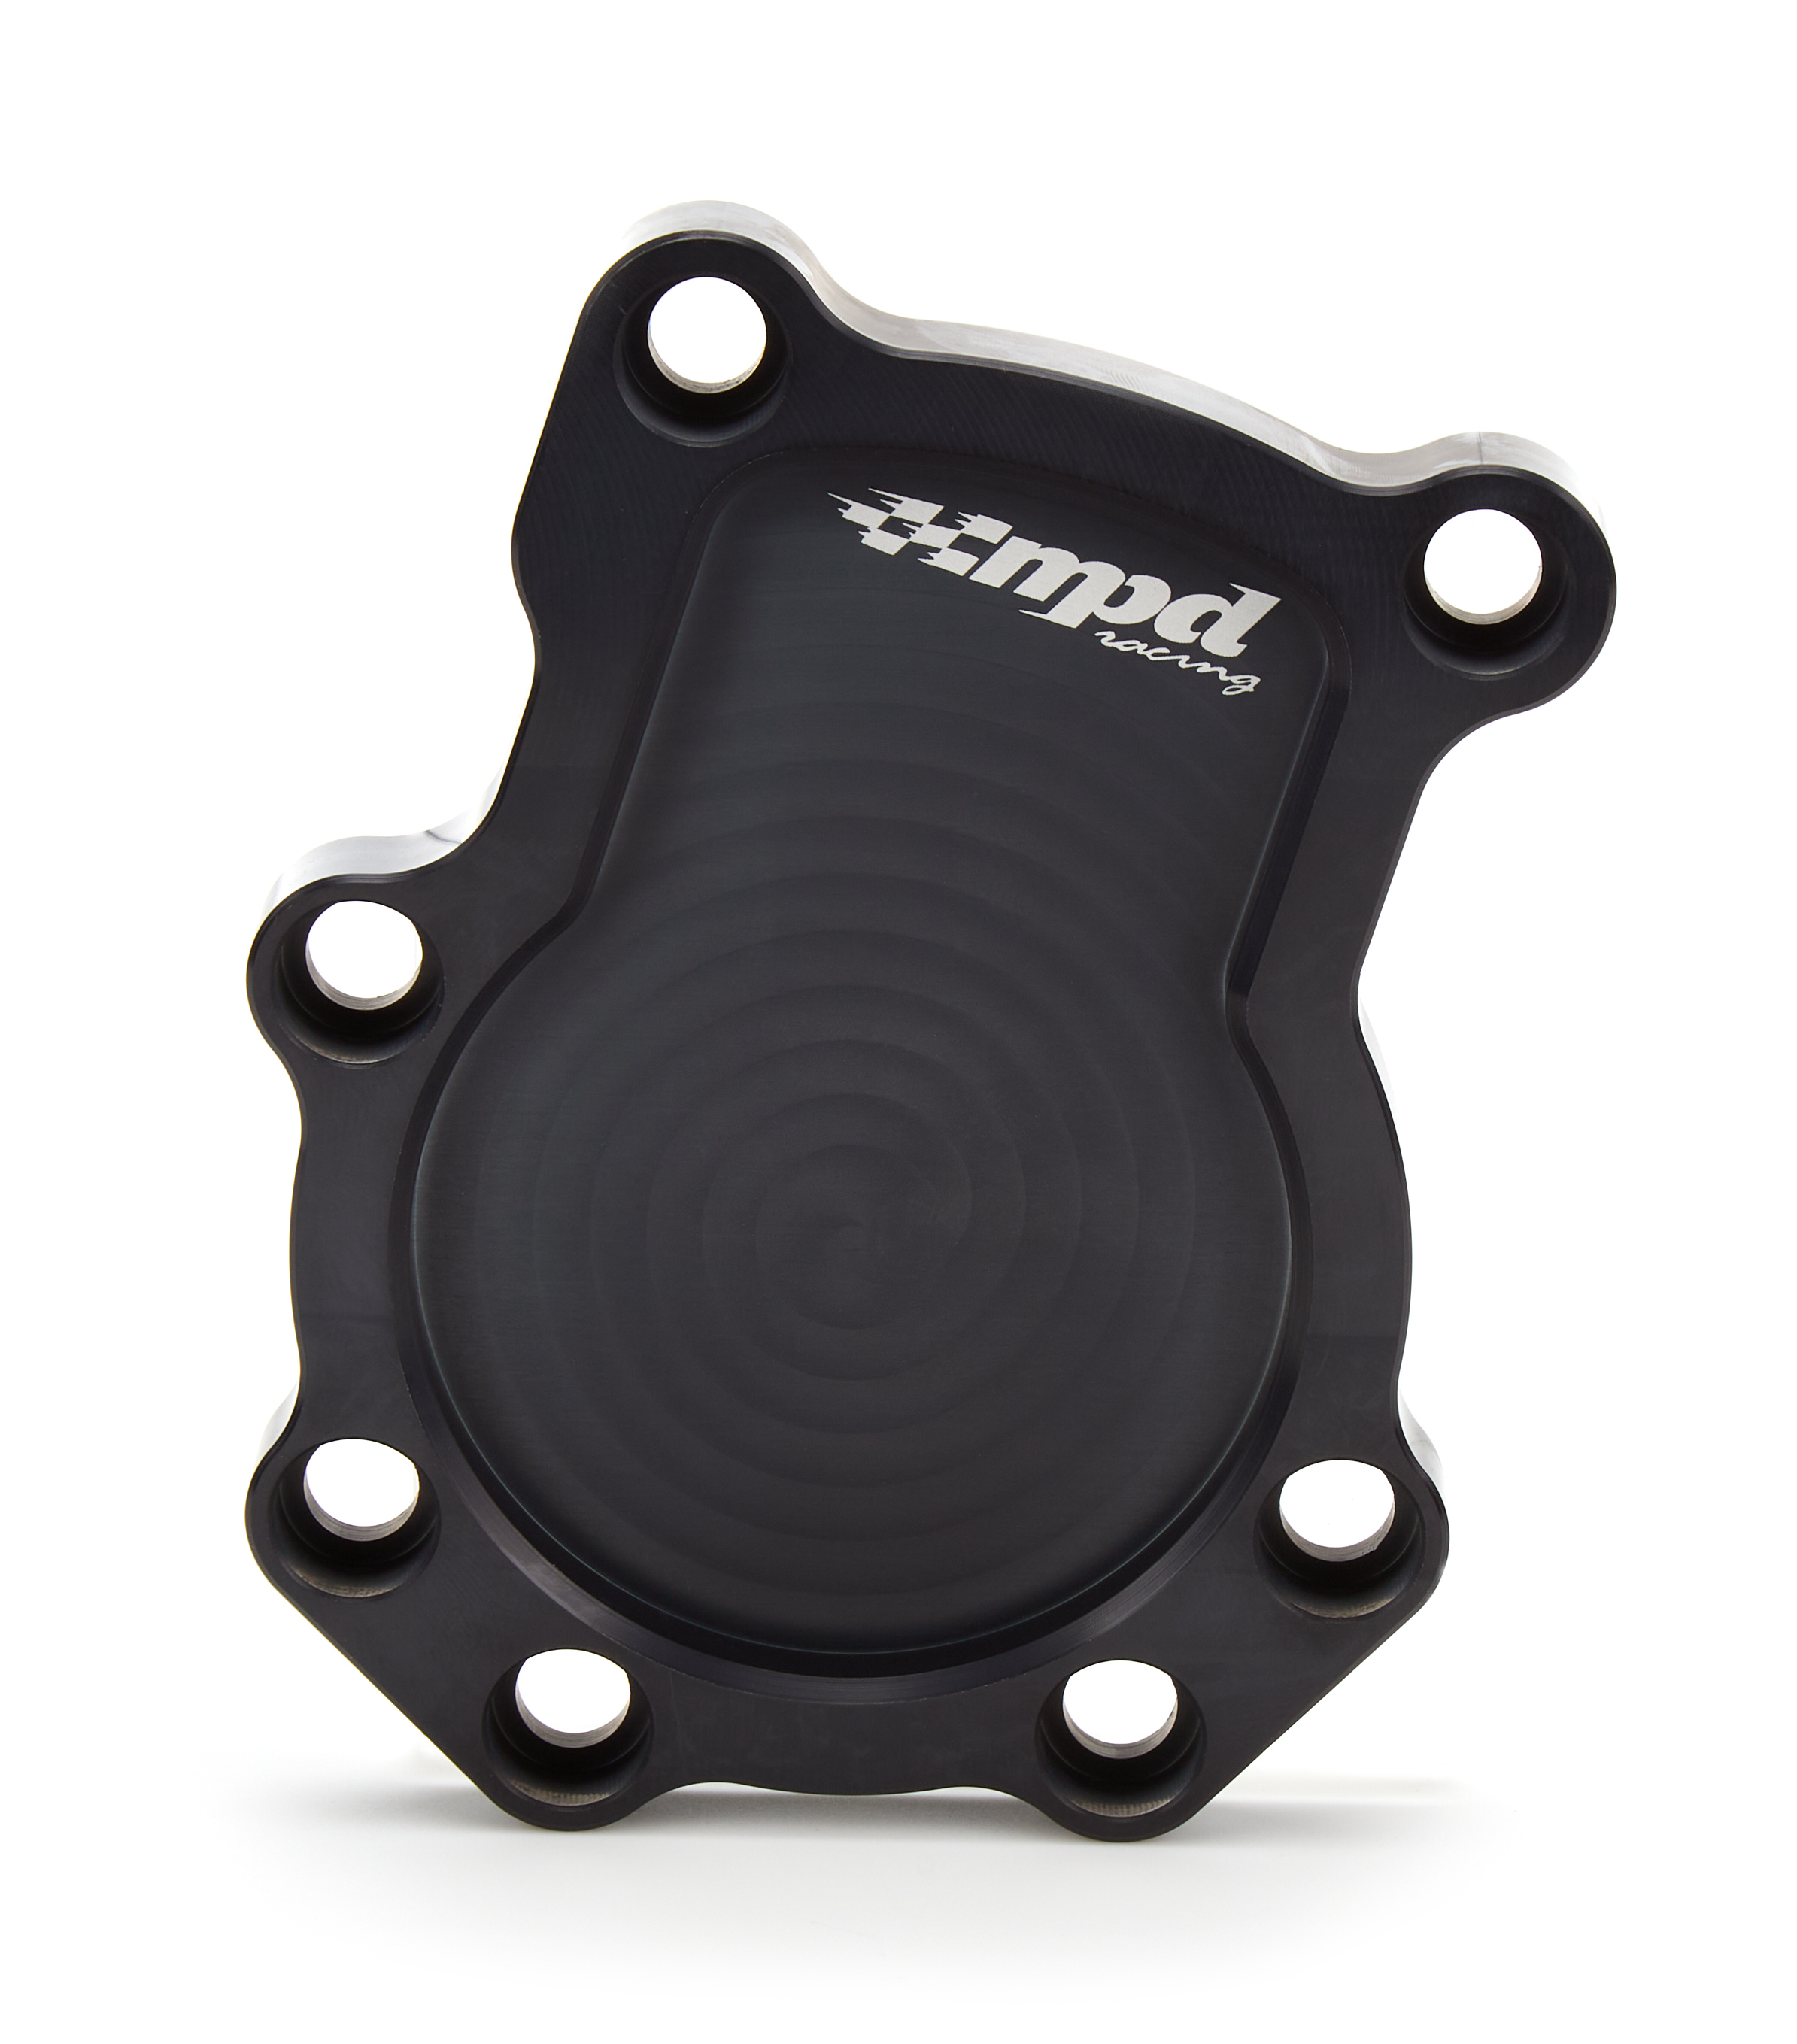 MPD Racing 18200 Oil Filter Adapter, Blockoff Plate, Bolt-On, Dry Sump, Aluminum, Black Anodized, Each